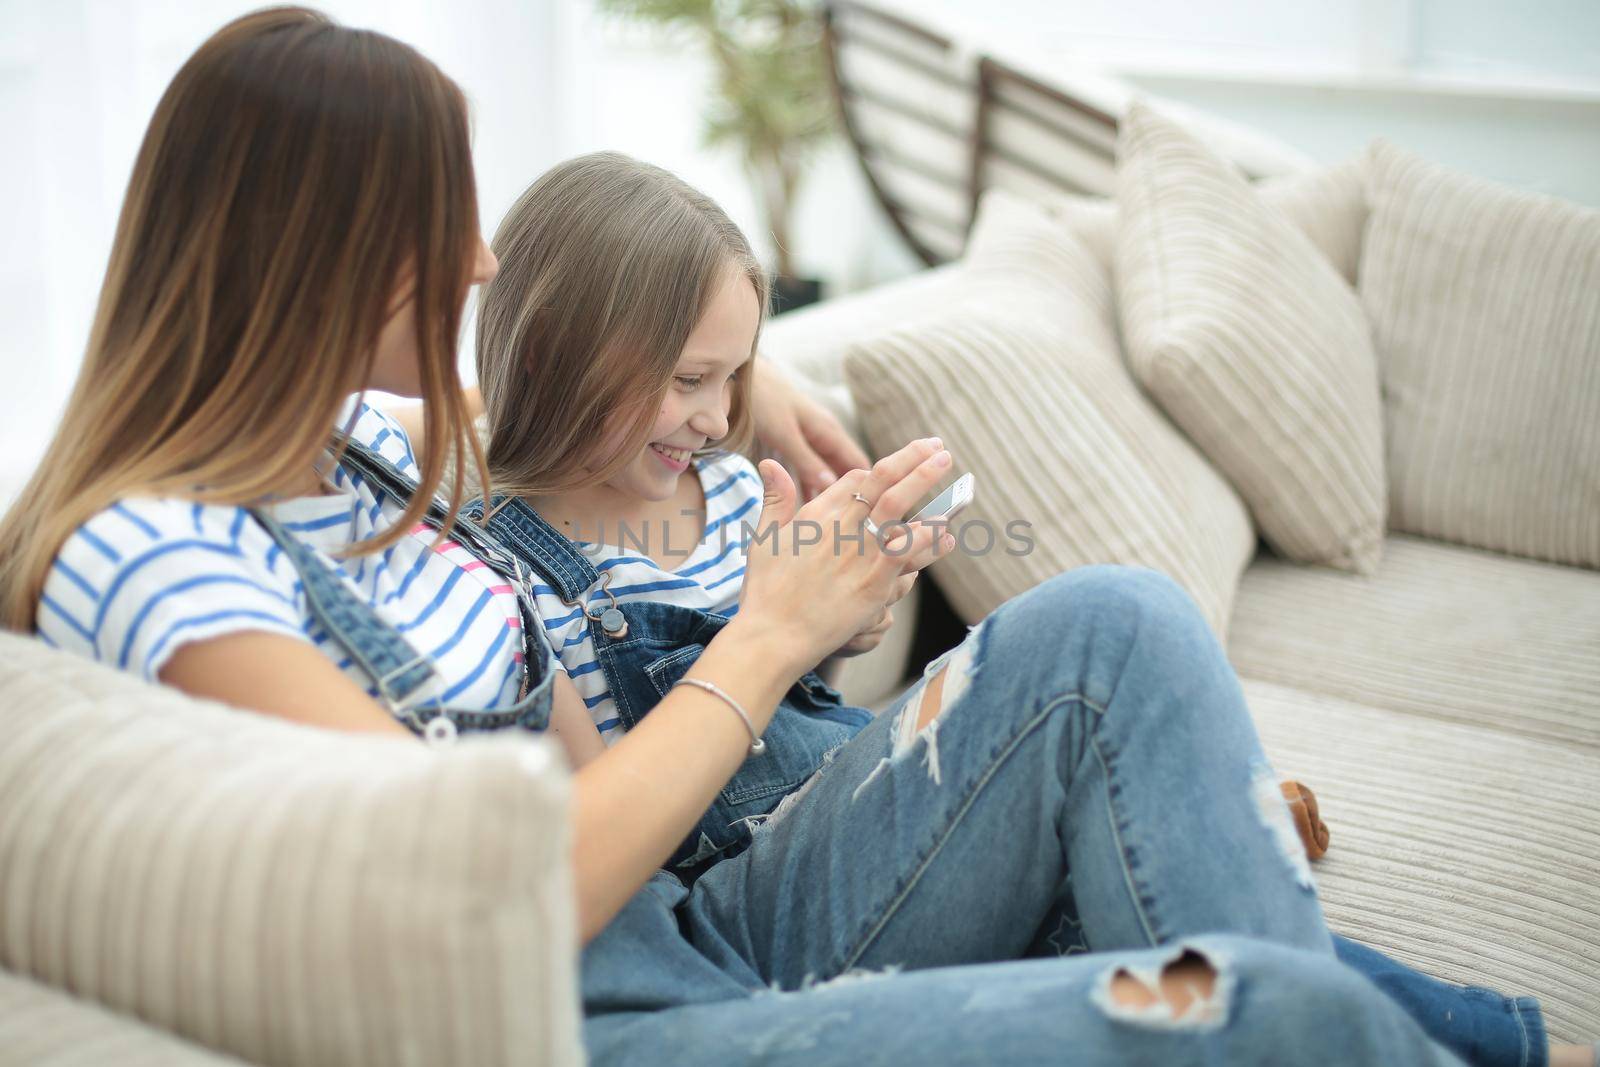 mom and her daughter reading SMS on smartphone by asdf